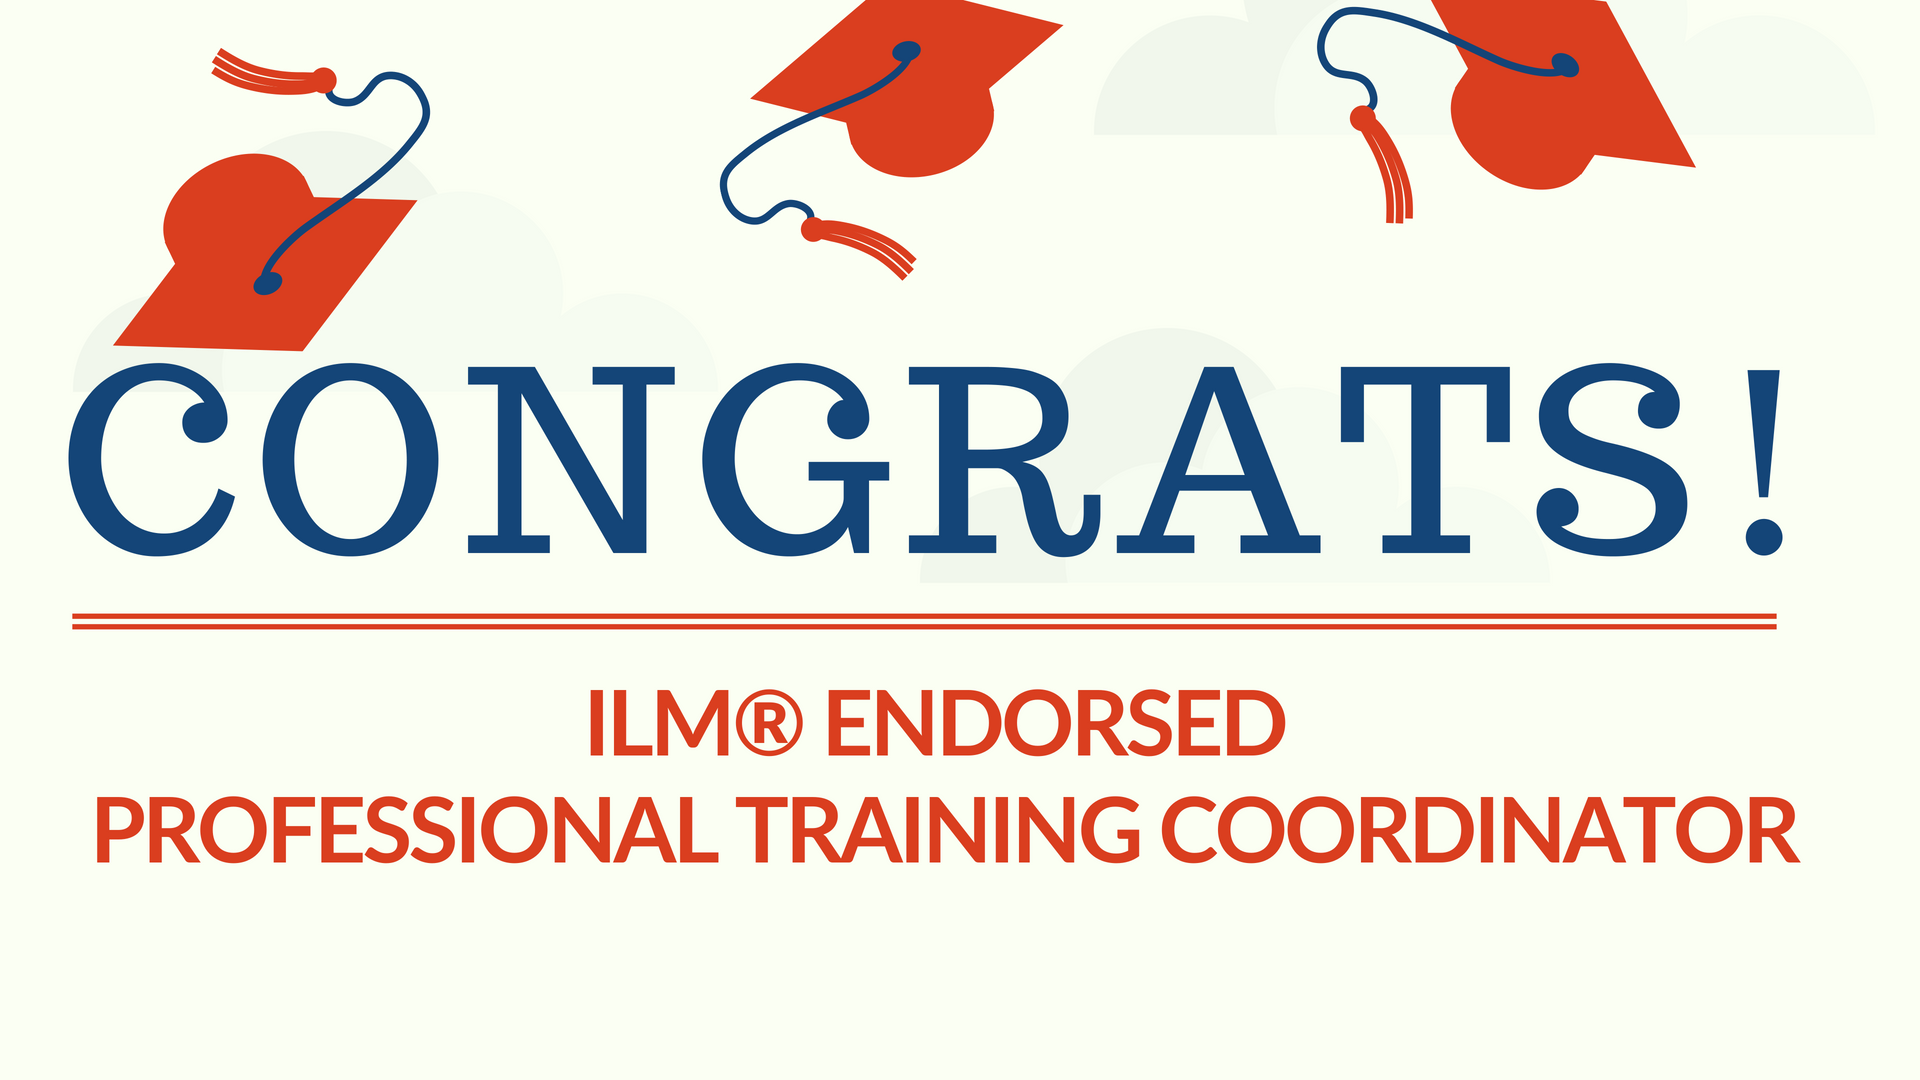 Tahani Bahassan set for success after completing ILM Professional Training Coordinator endorsed programme